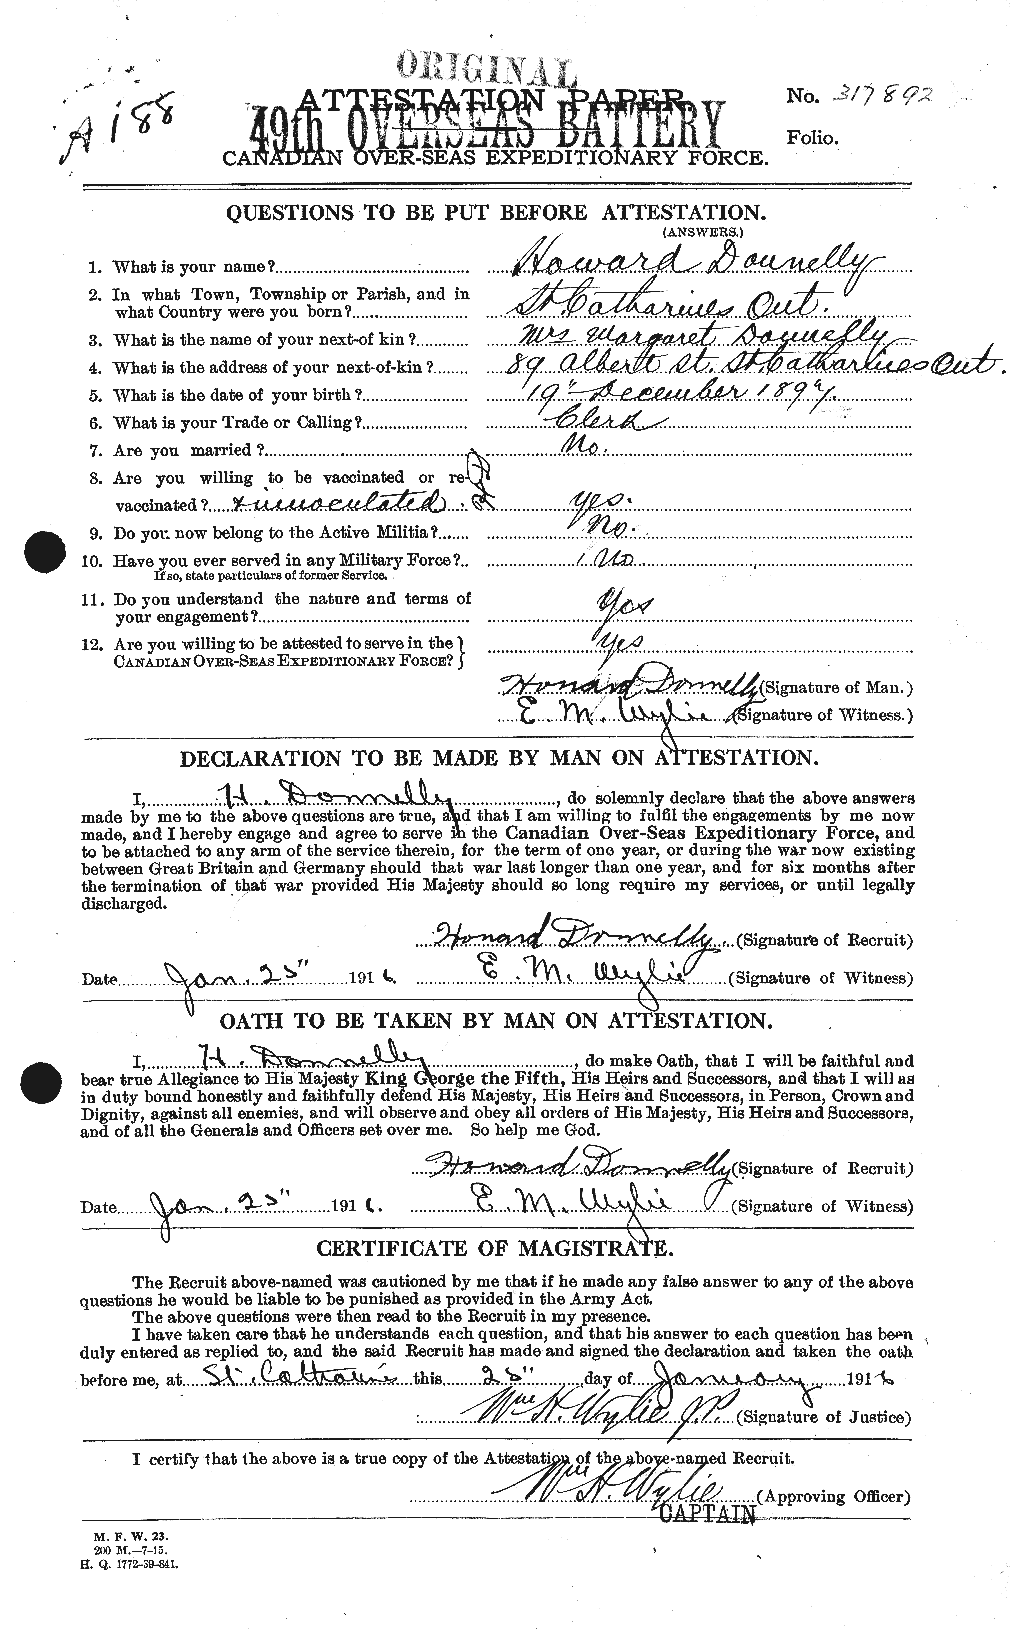 Personnel Records of the First World War - CEF 294819a